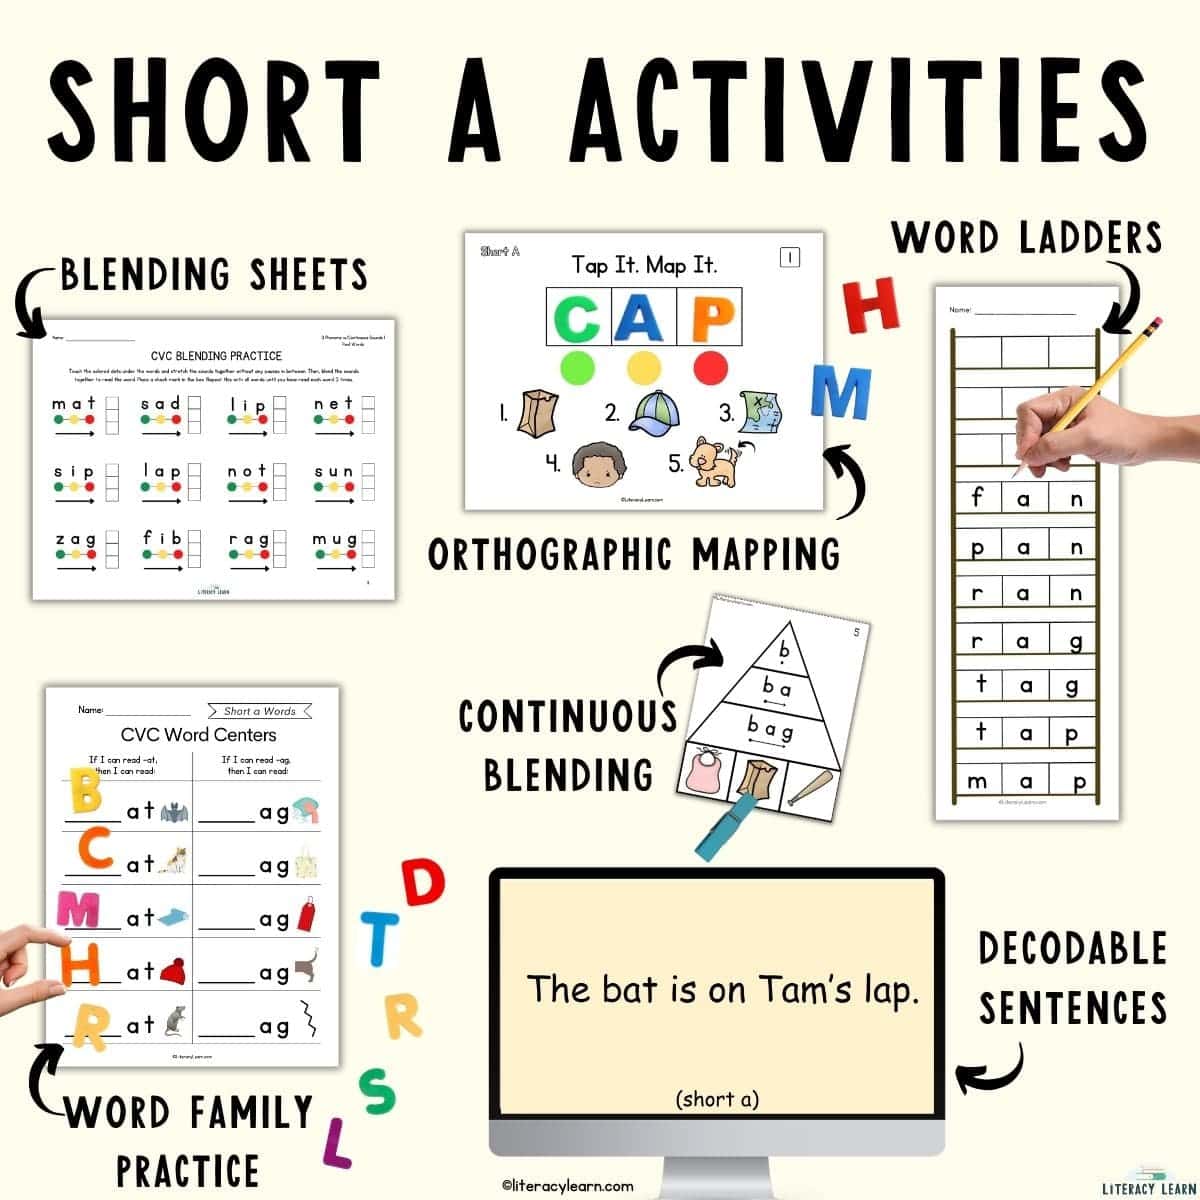 Graphic entitled "Short A Activities" with pictures of activities and labels.